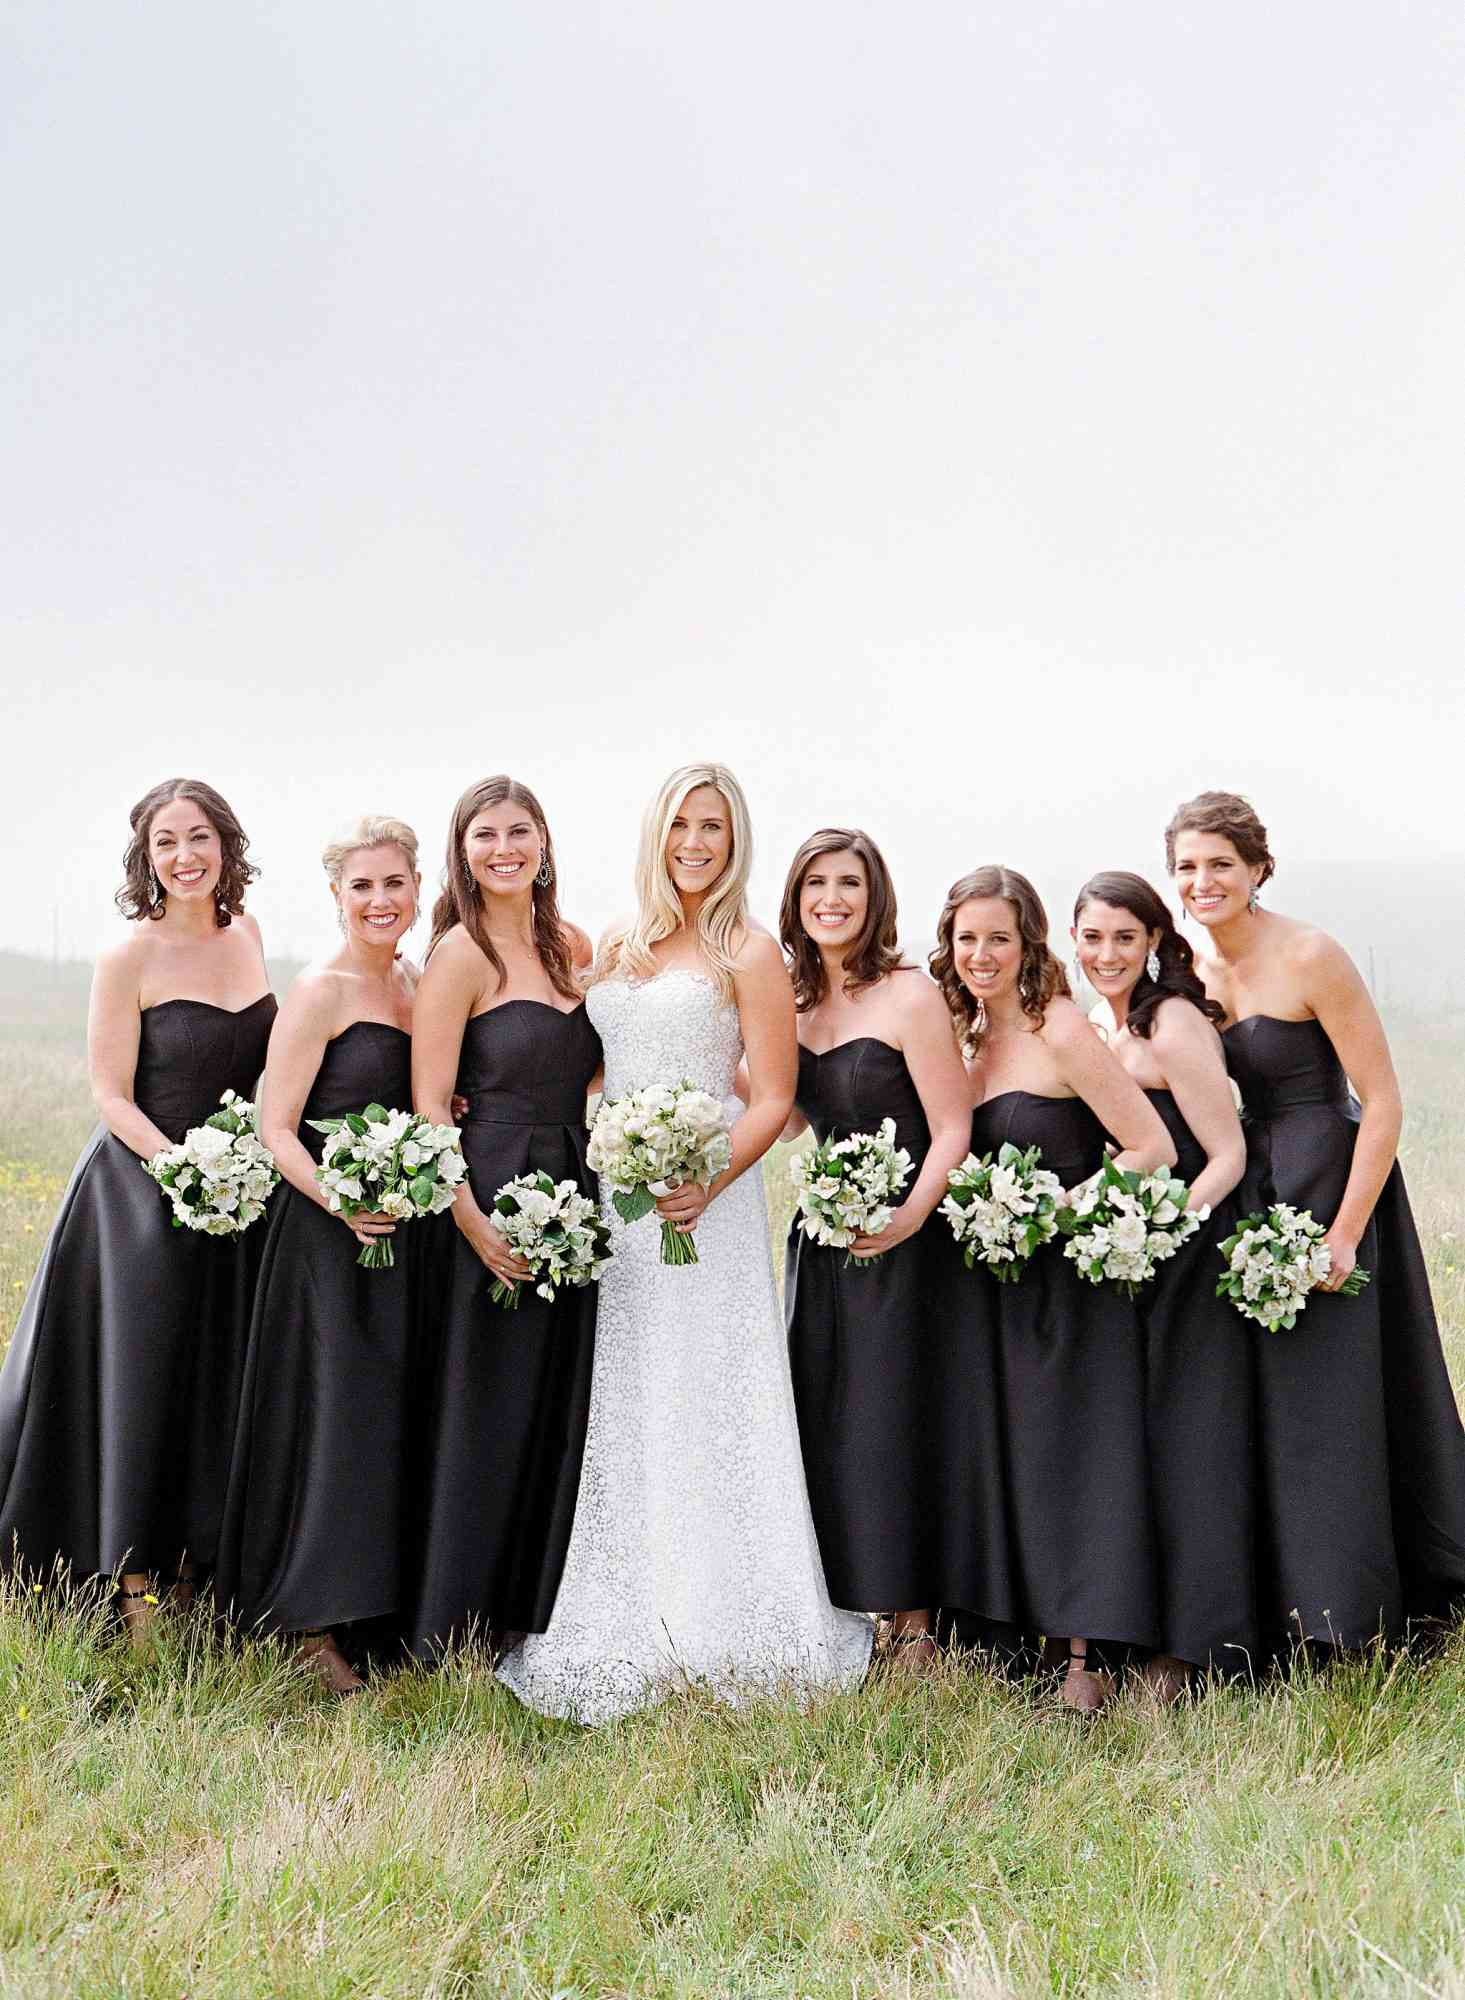 What does the bride do for her bridesmaids